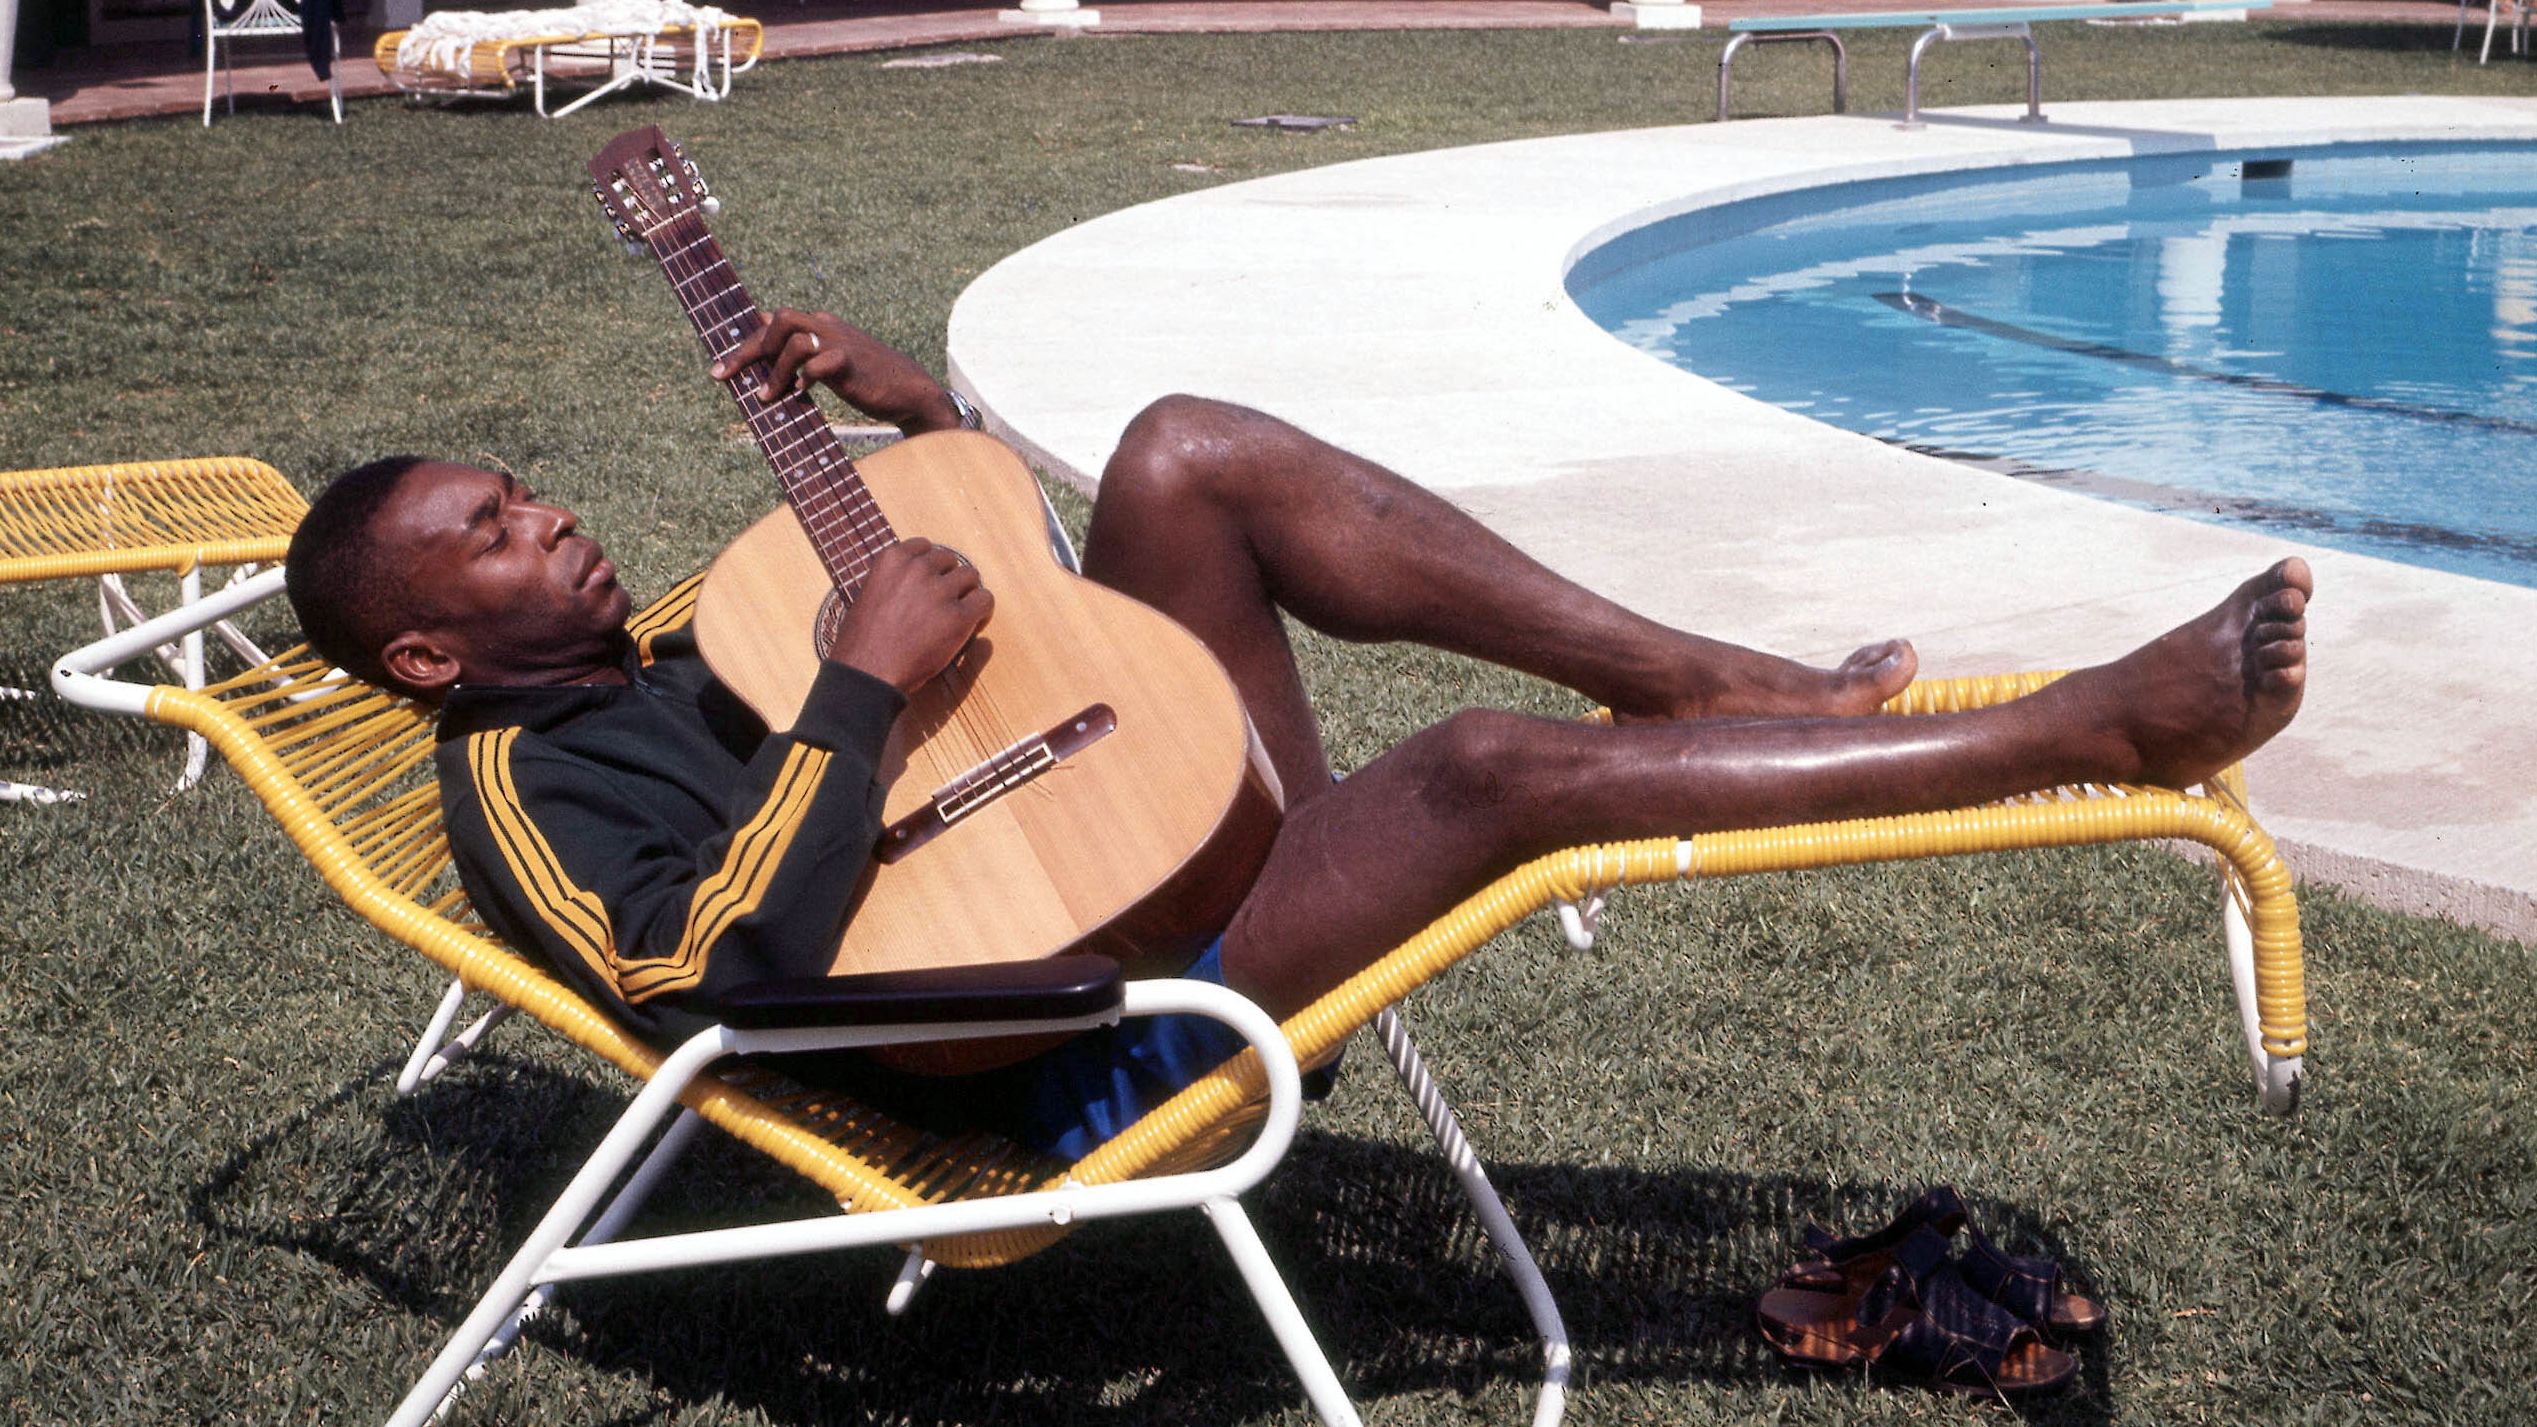 Pelé relaxes by a hotel swimming pool while in Mexico for the 1970 World Cup.